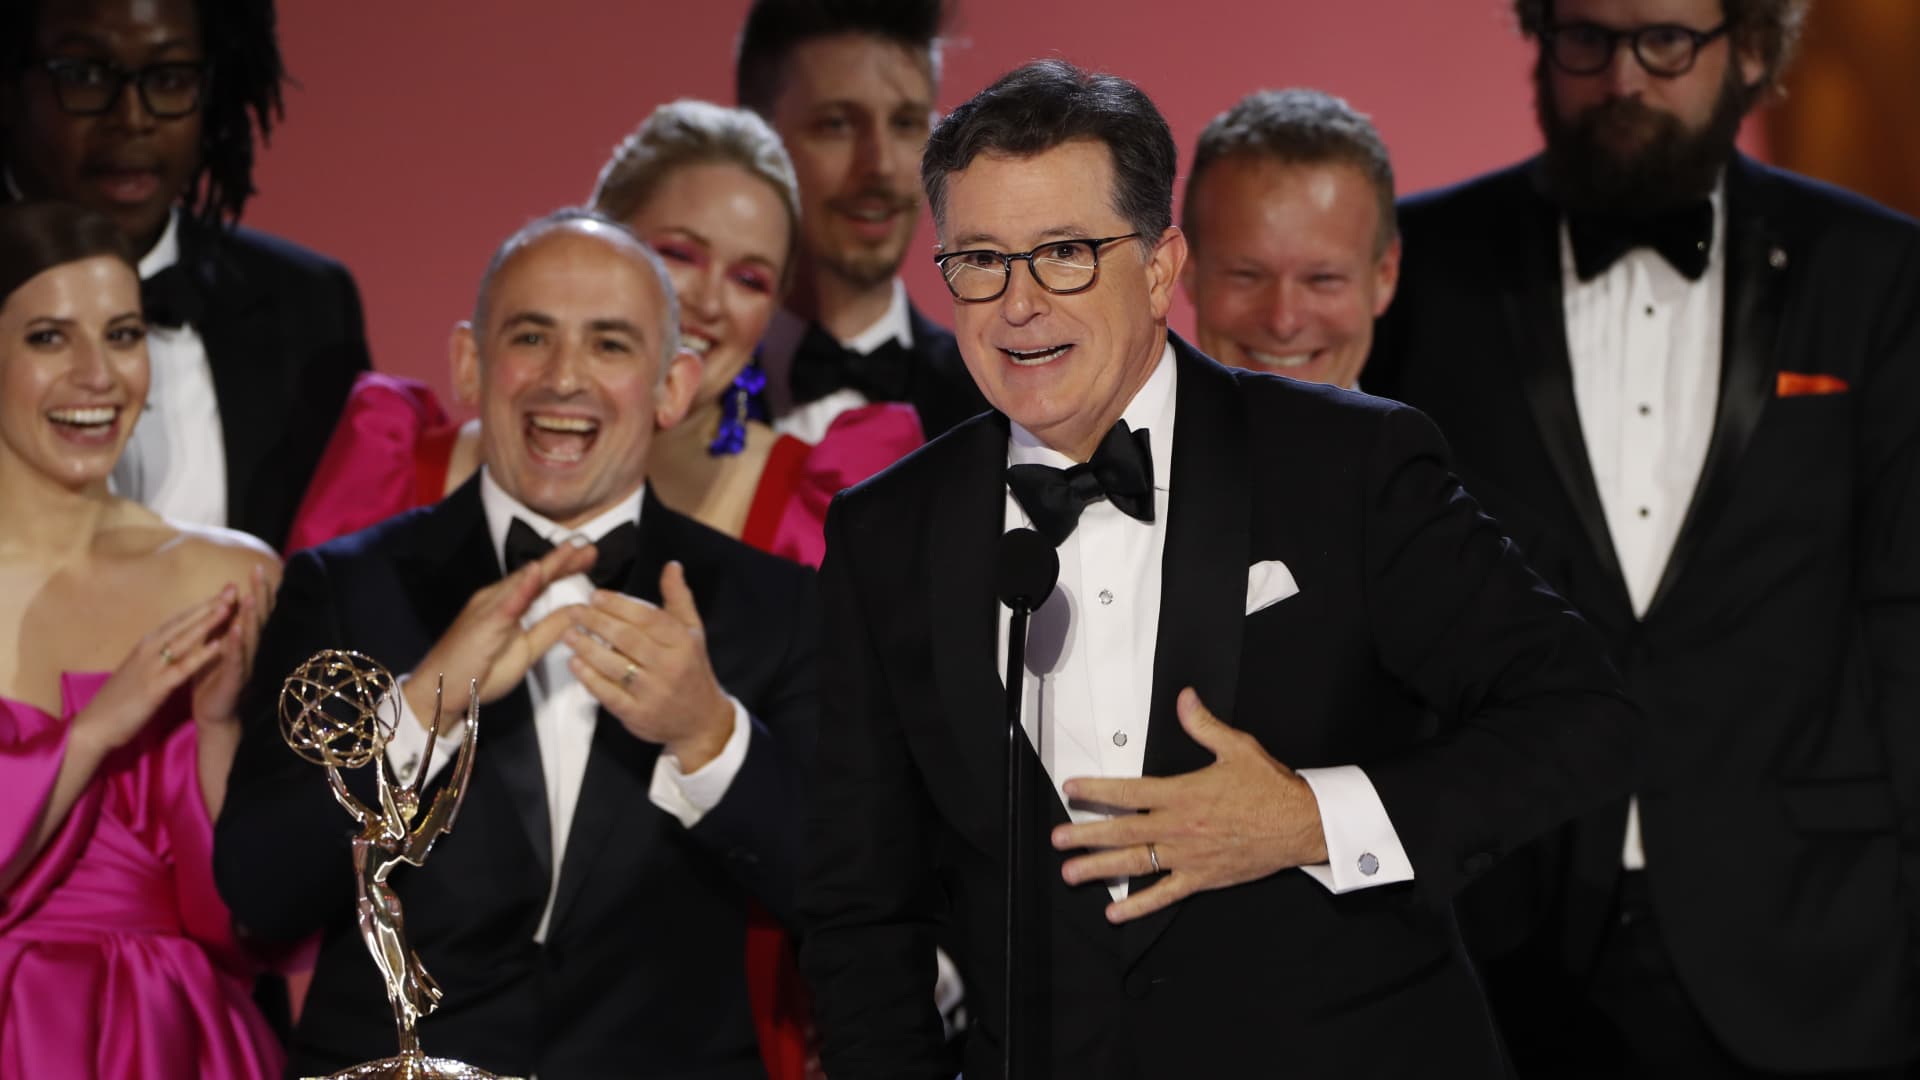 Stephen Colbert and the writers of The Late Show with Stephen Colbert appears at the 73RD EMMY AWARDS, broadcast Sunday, Sept. 19.